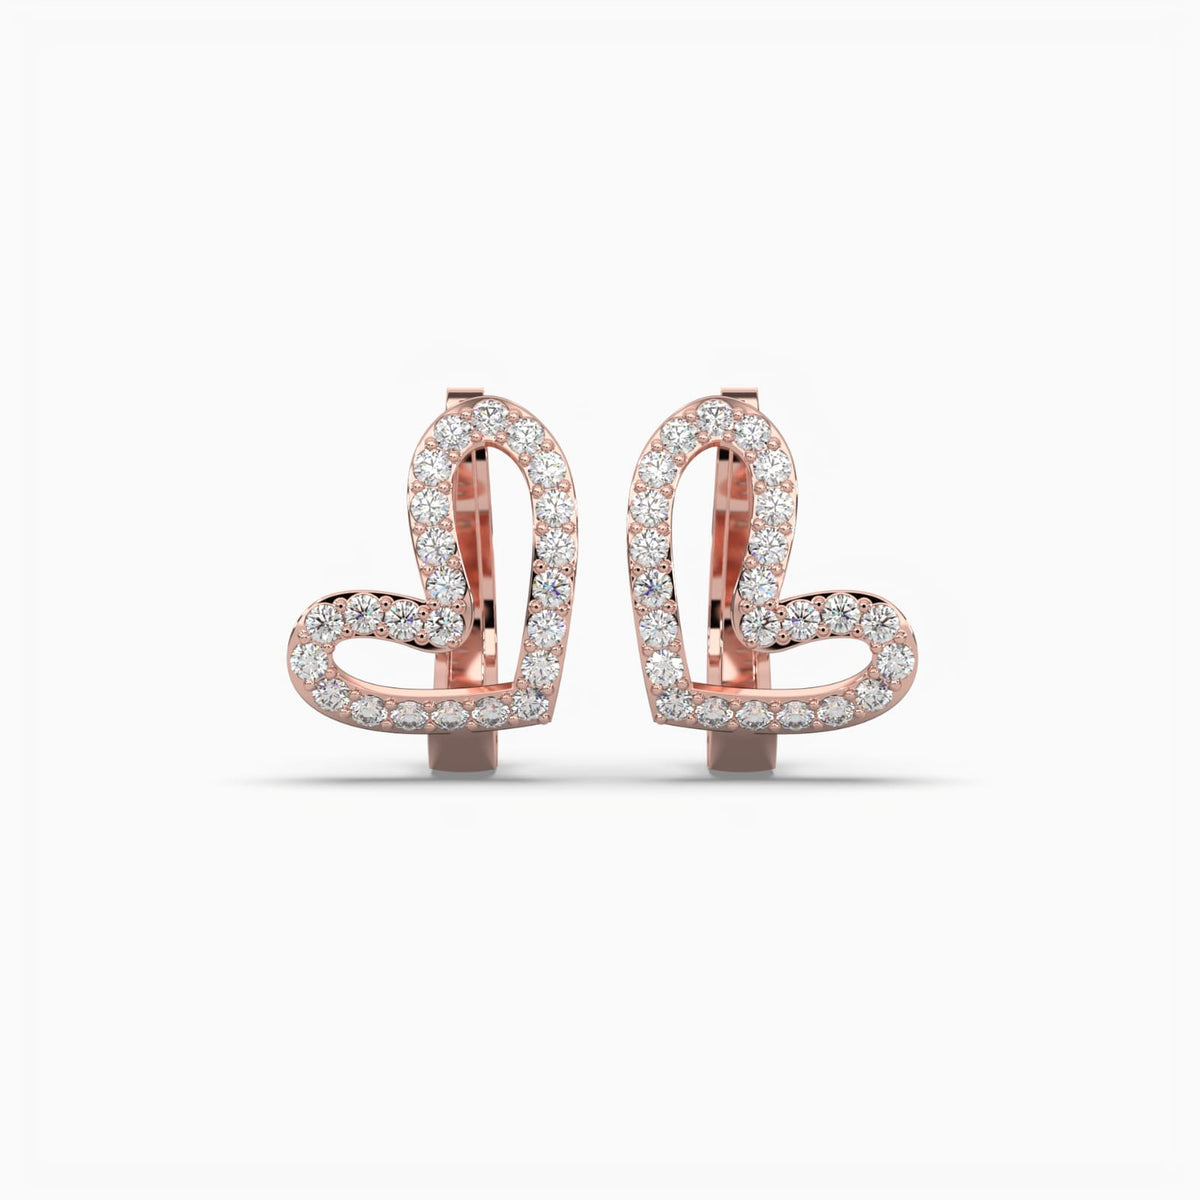 Elevate Your Look: 14k & 18k Diamond Stud Earrings with a Heart Design